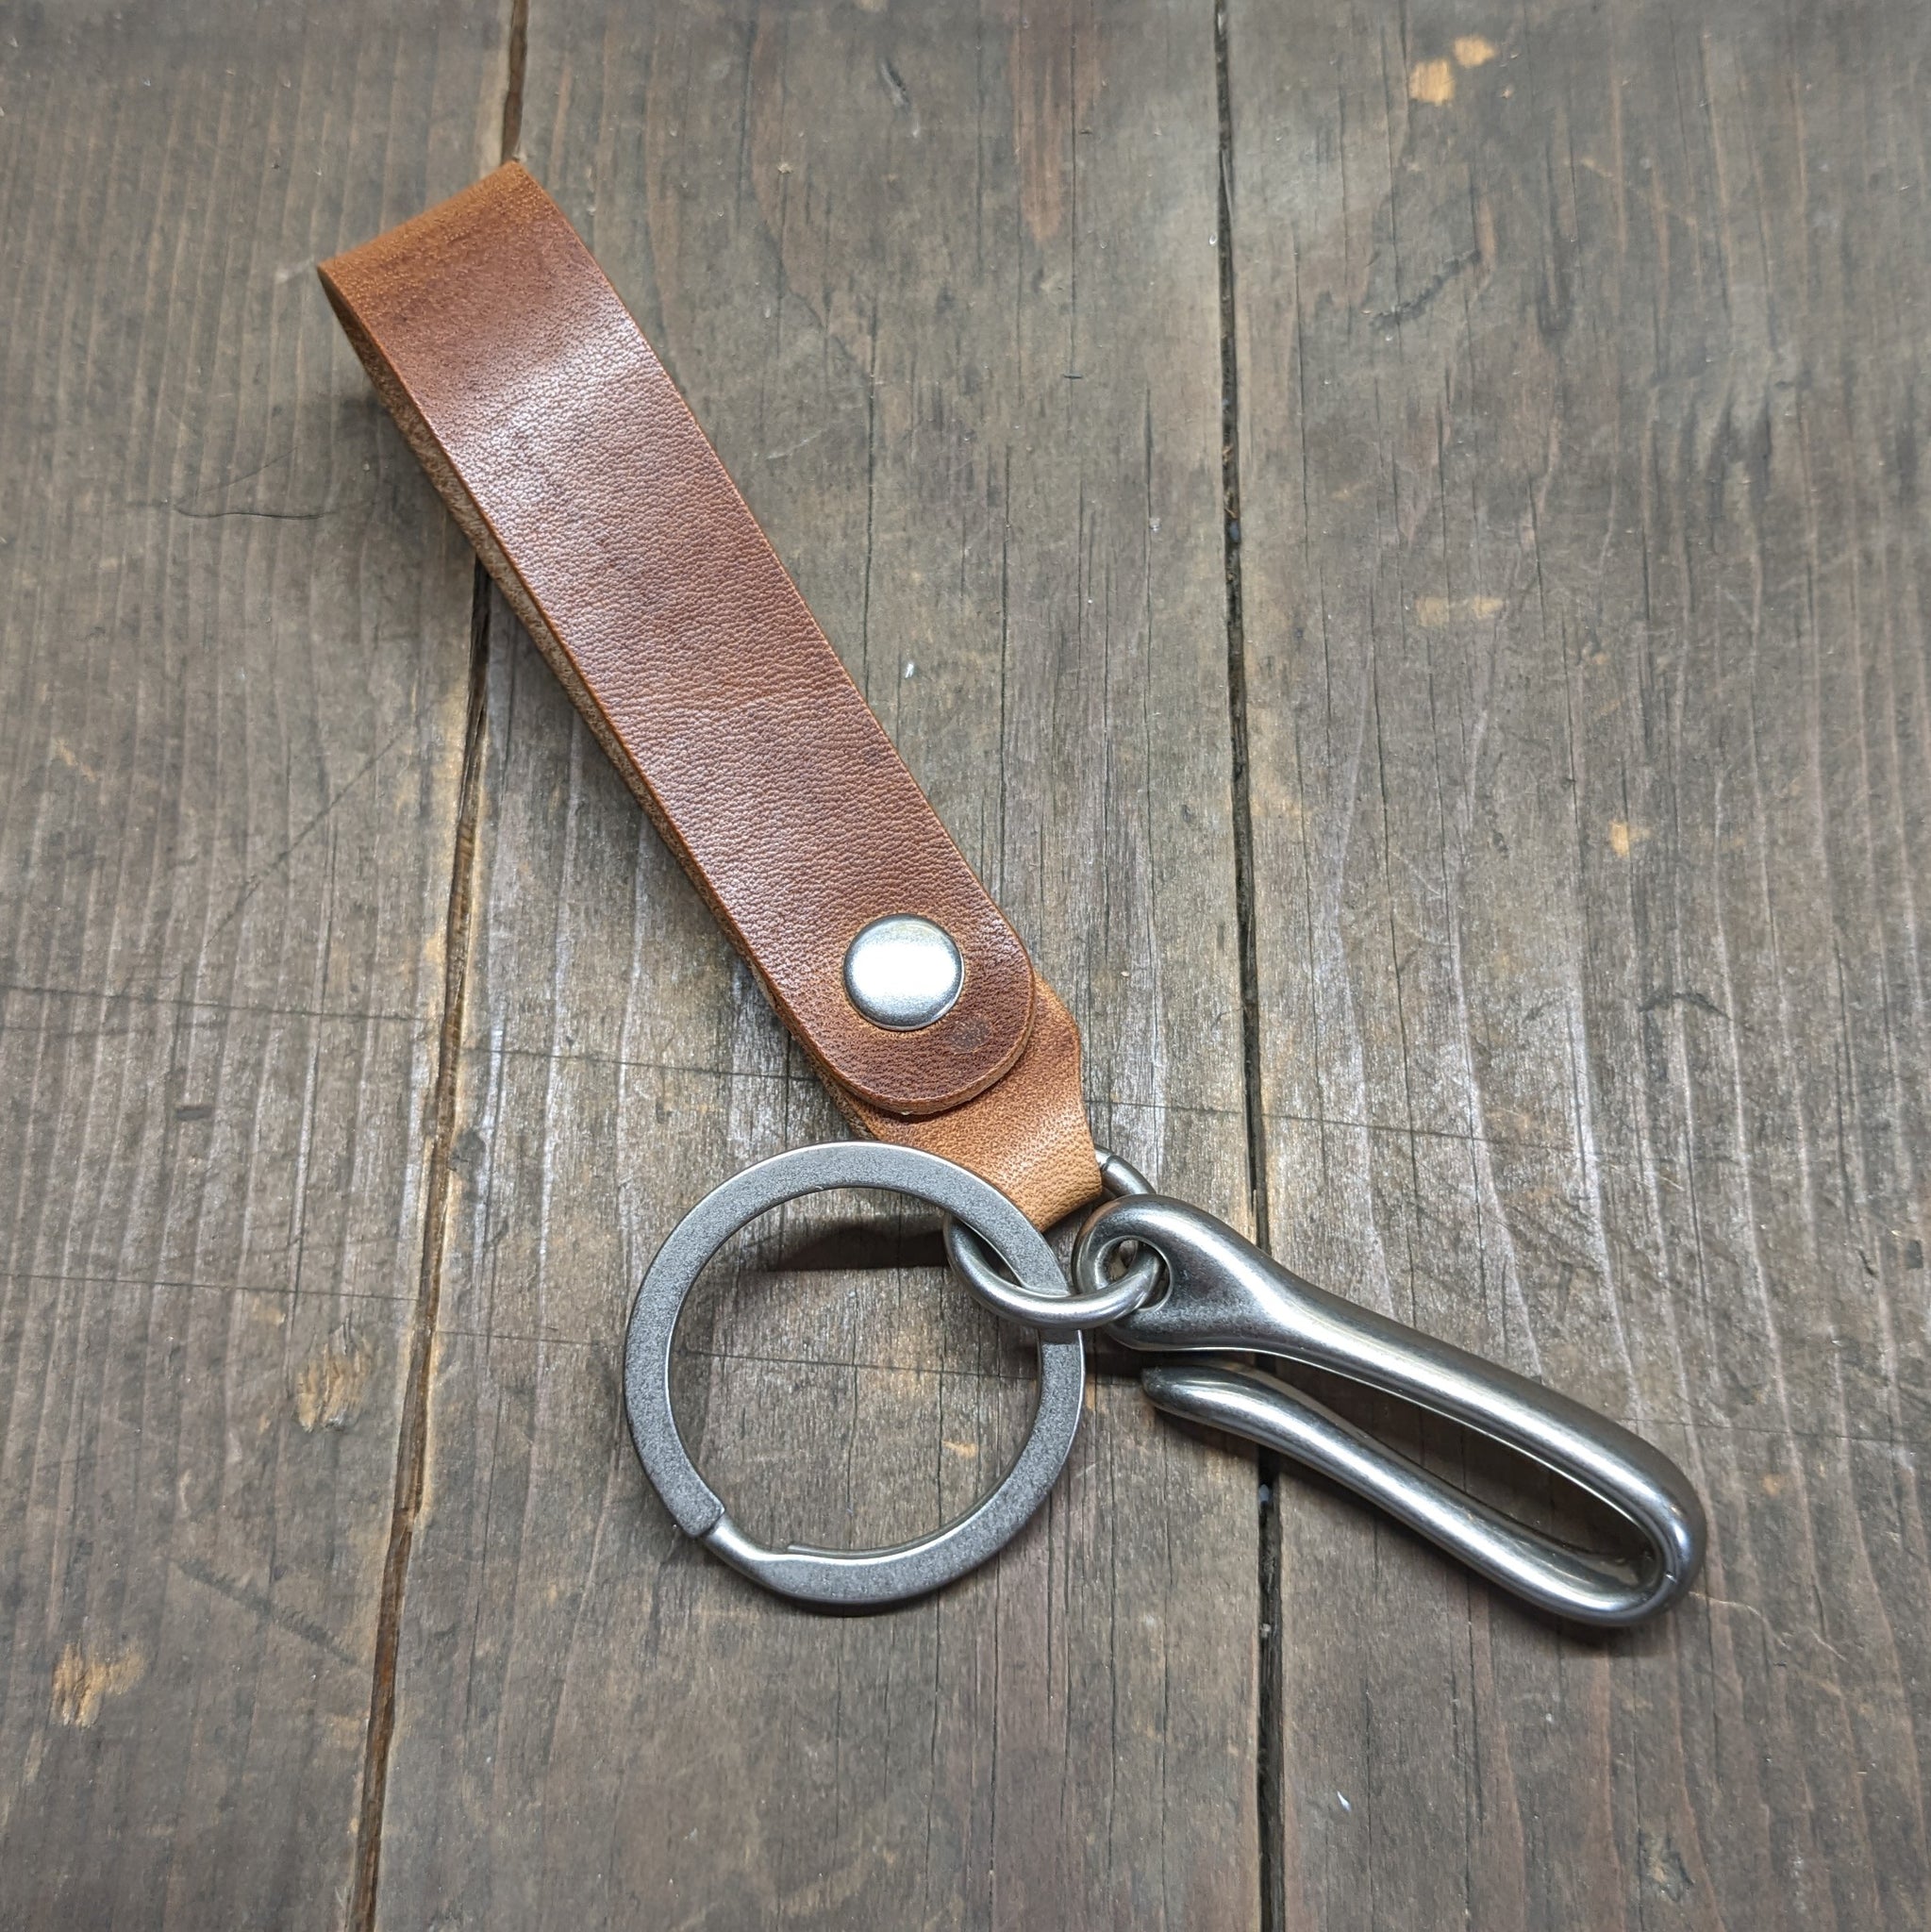 Caliber Leather Company Hemlock Loop - Mini Japanese Fish Hook Personalized Horween Leather Keychain Black / Brown Nut